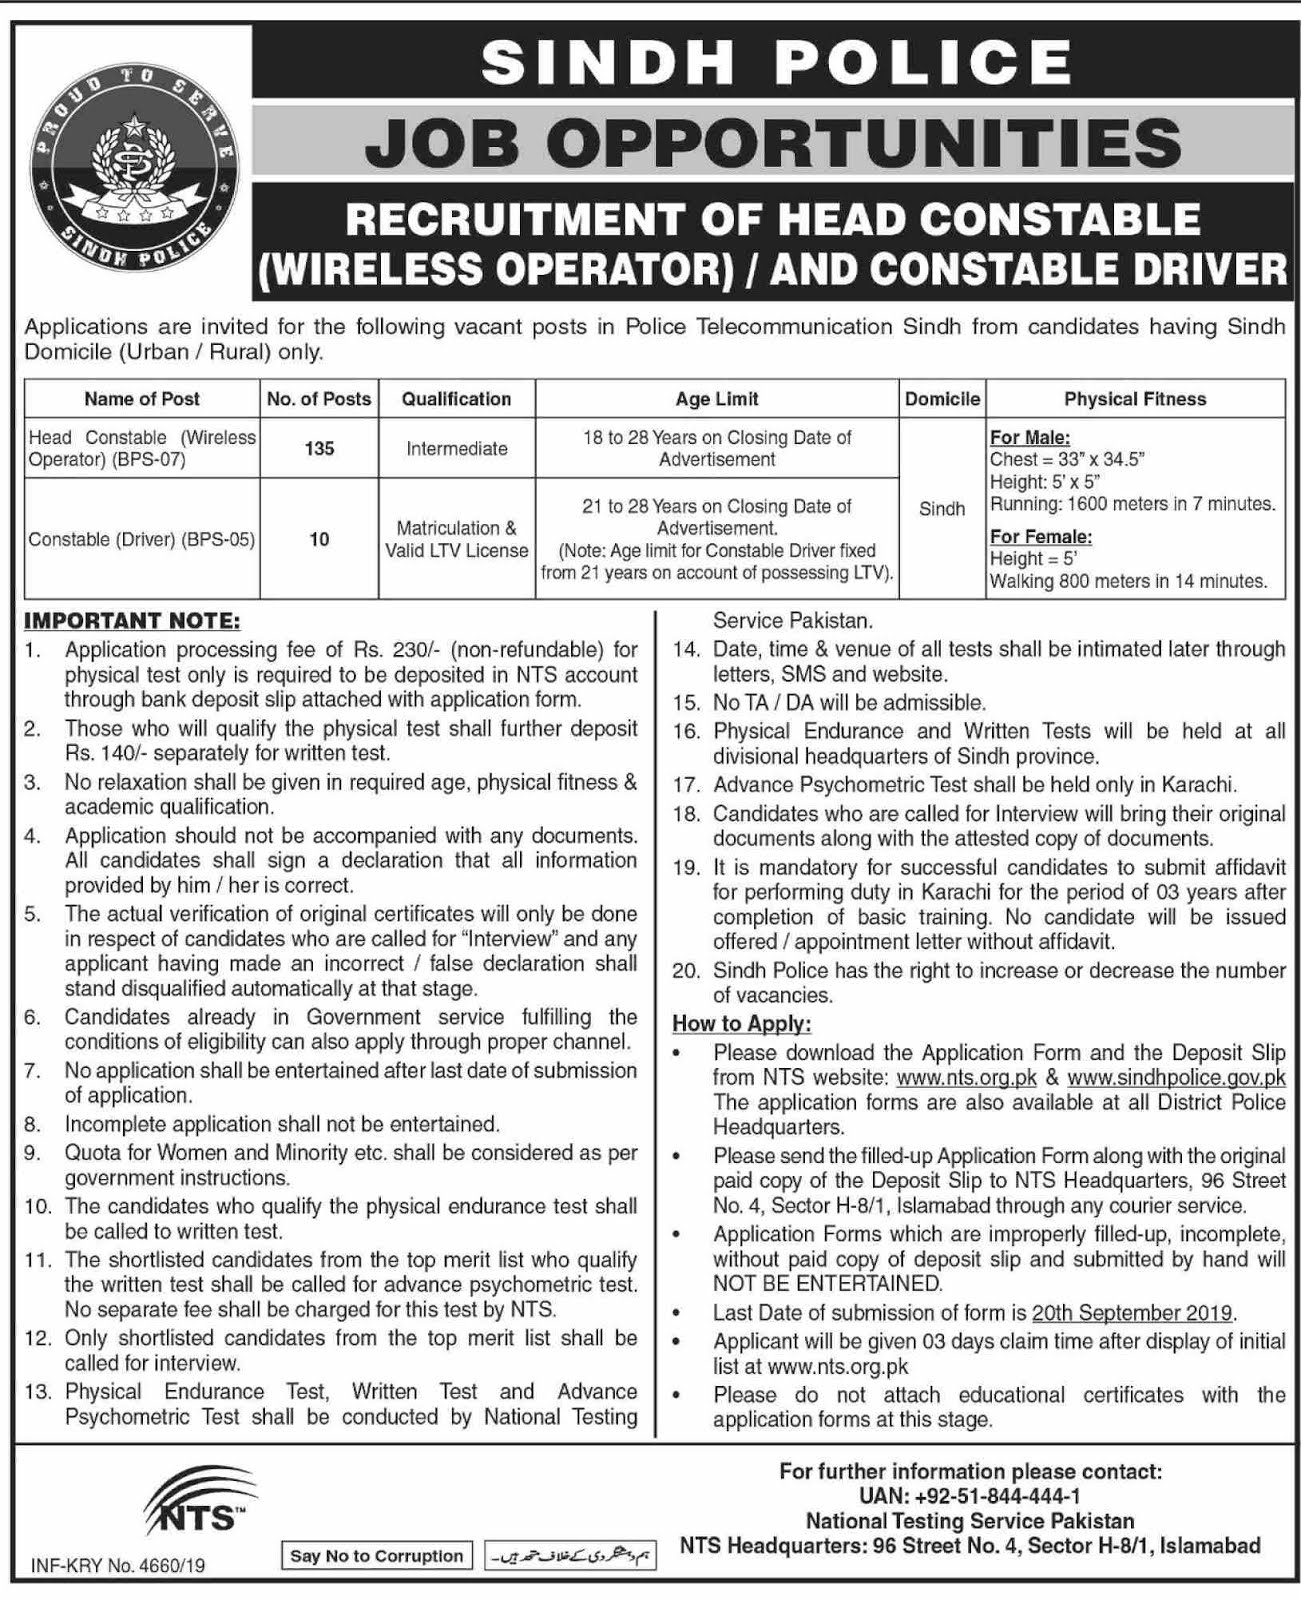 NTS Announced Jobs In Sindh Police For The Post Of Constable And Head Constable 2019